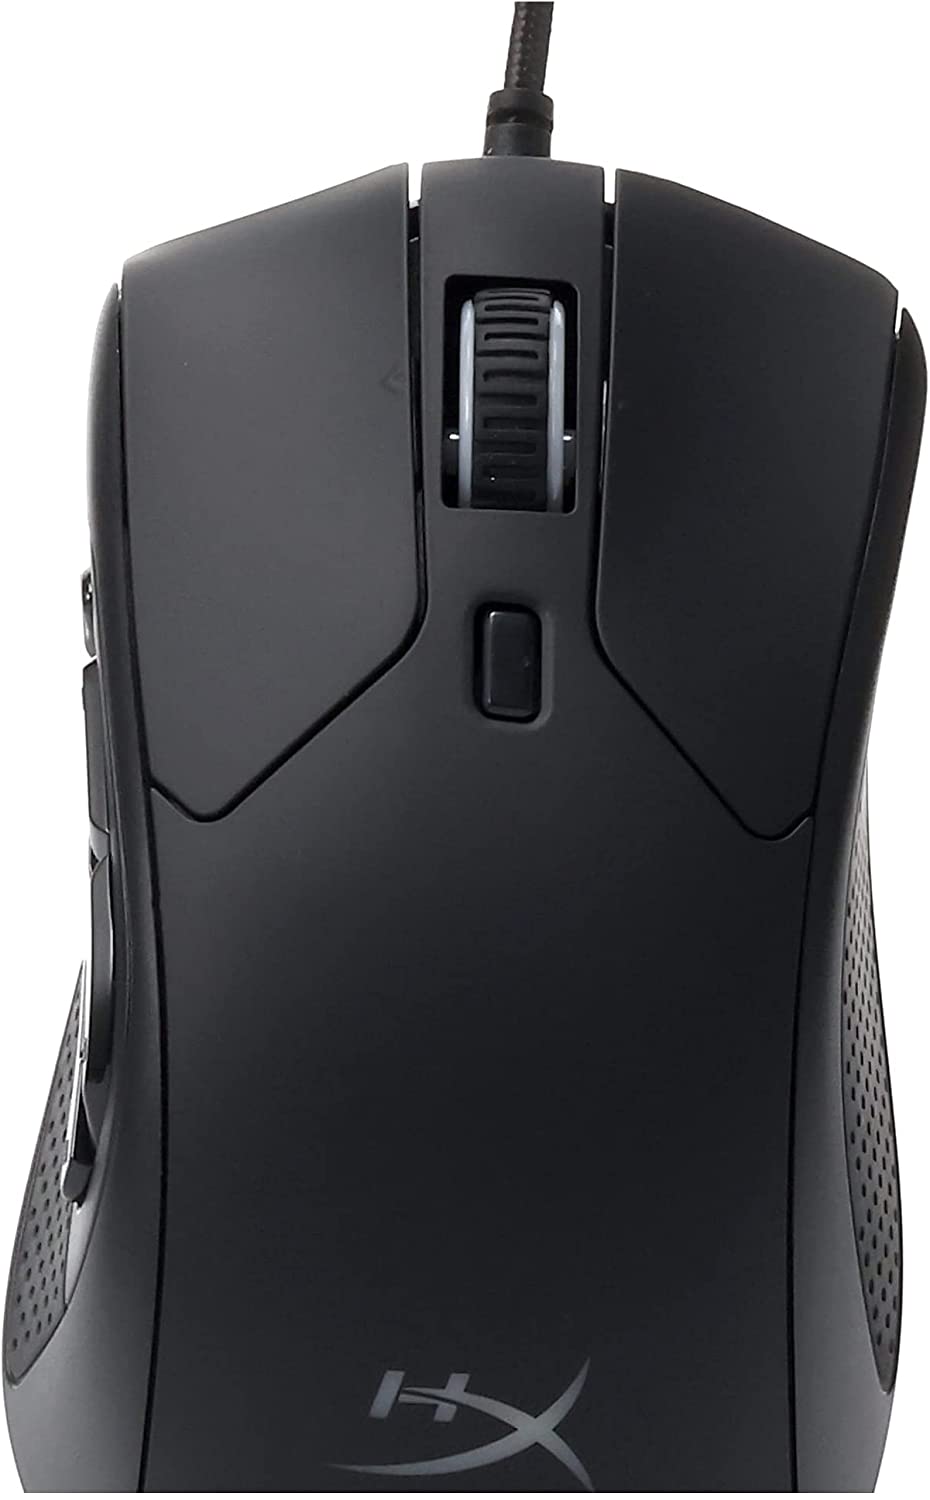 Best Mouse for Butterfly clicking